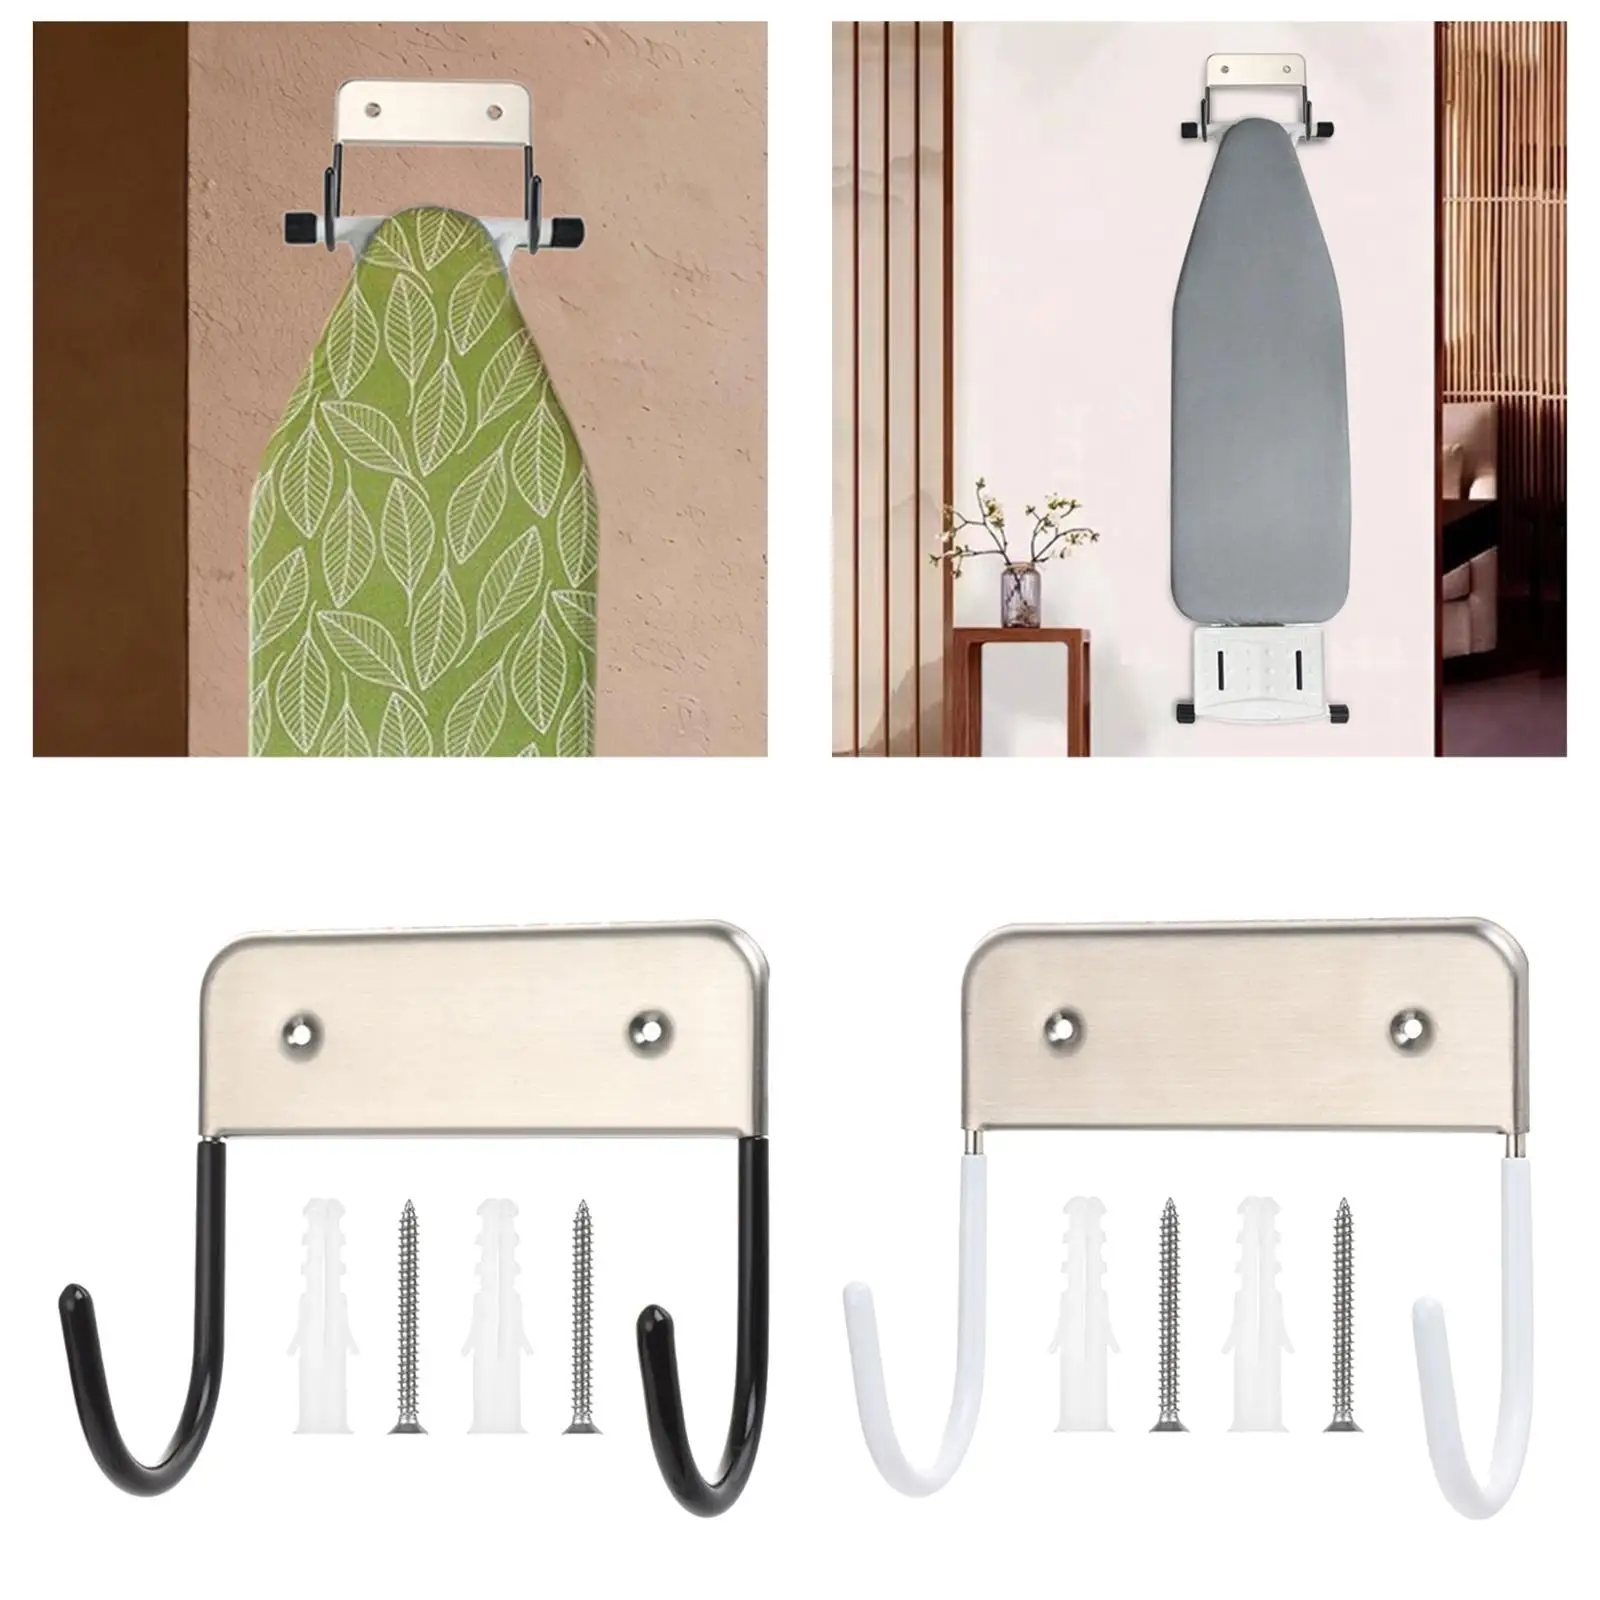 Ironing Board Holder Wall Hanging Stainless Steel Ironing Hook Wall Mounted for Room Wall